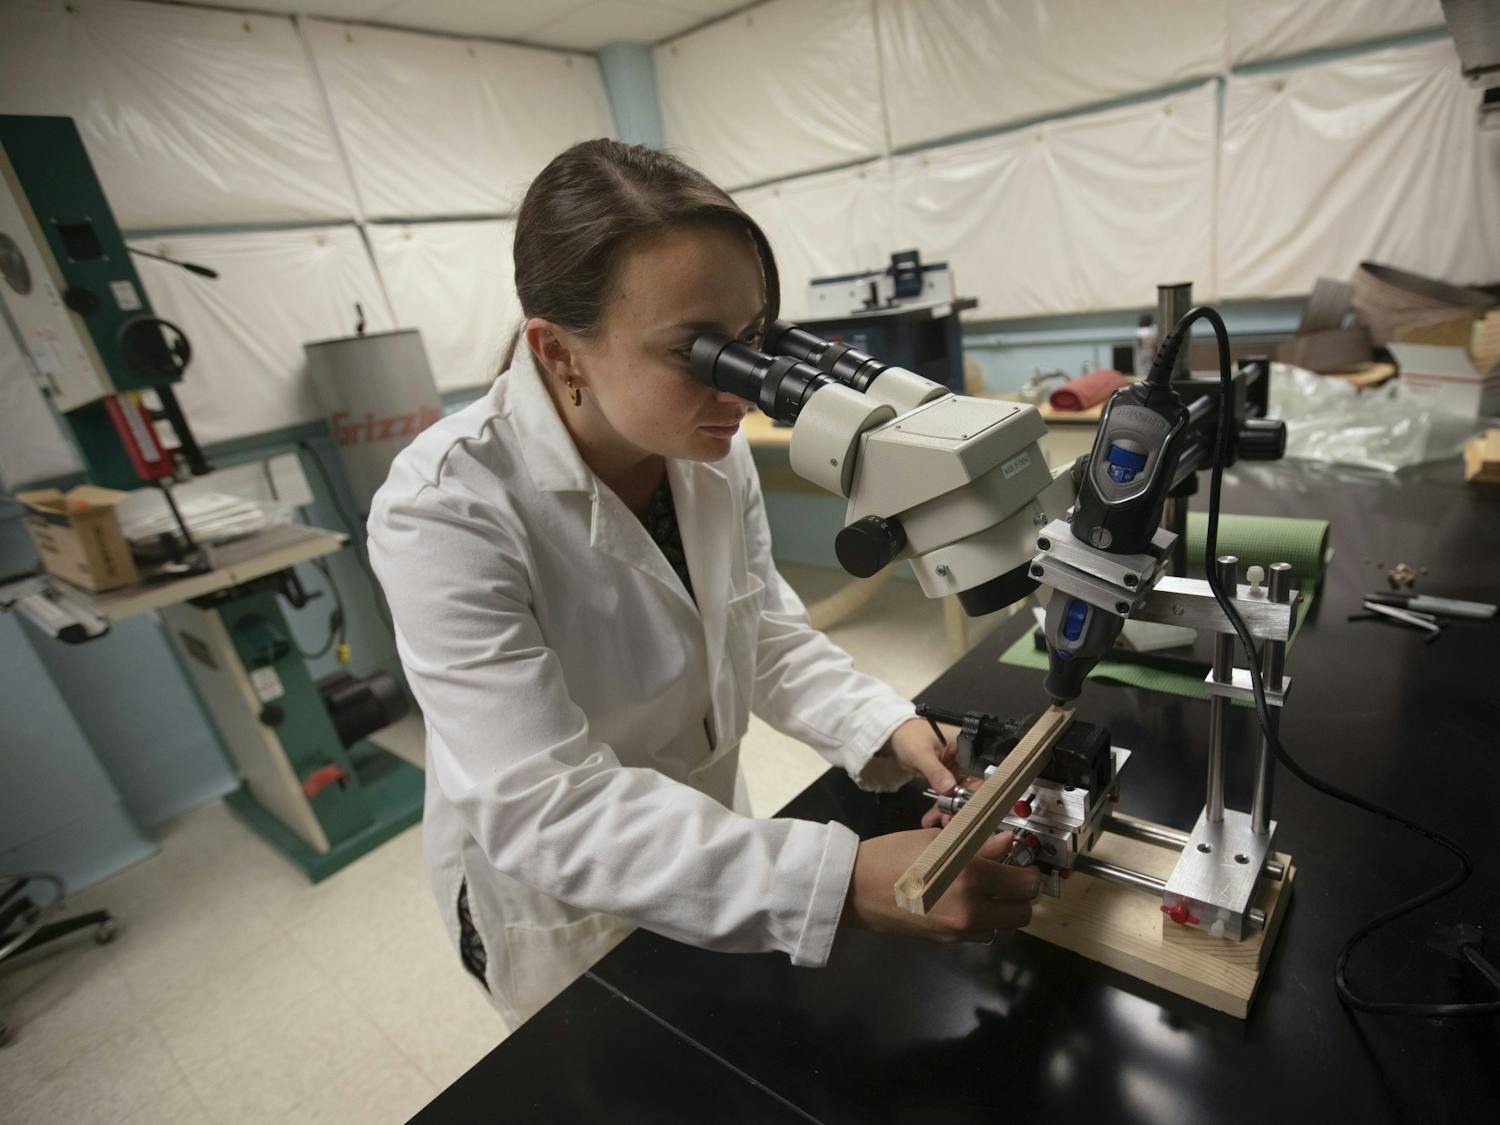 Karly Schmidt-Simard, a PhD candidate in Erika Wise's dendrochronology lab, drills a tree core sample to prepare it for chemical analysis on August 29, 2019. Photo courtesy of Megan May/UNC Research